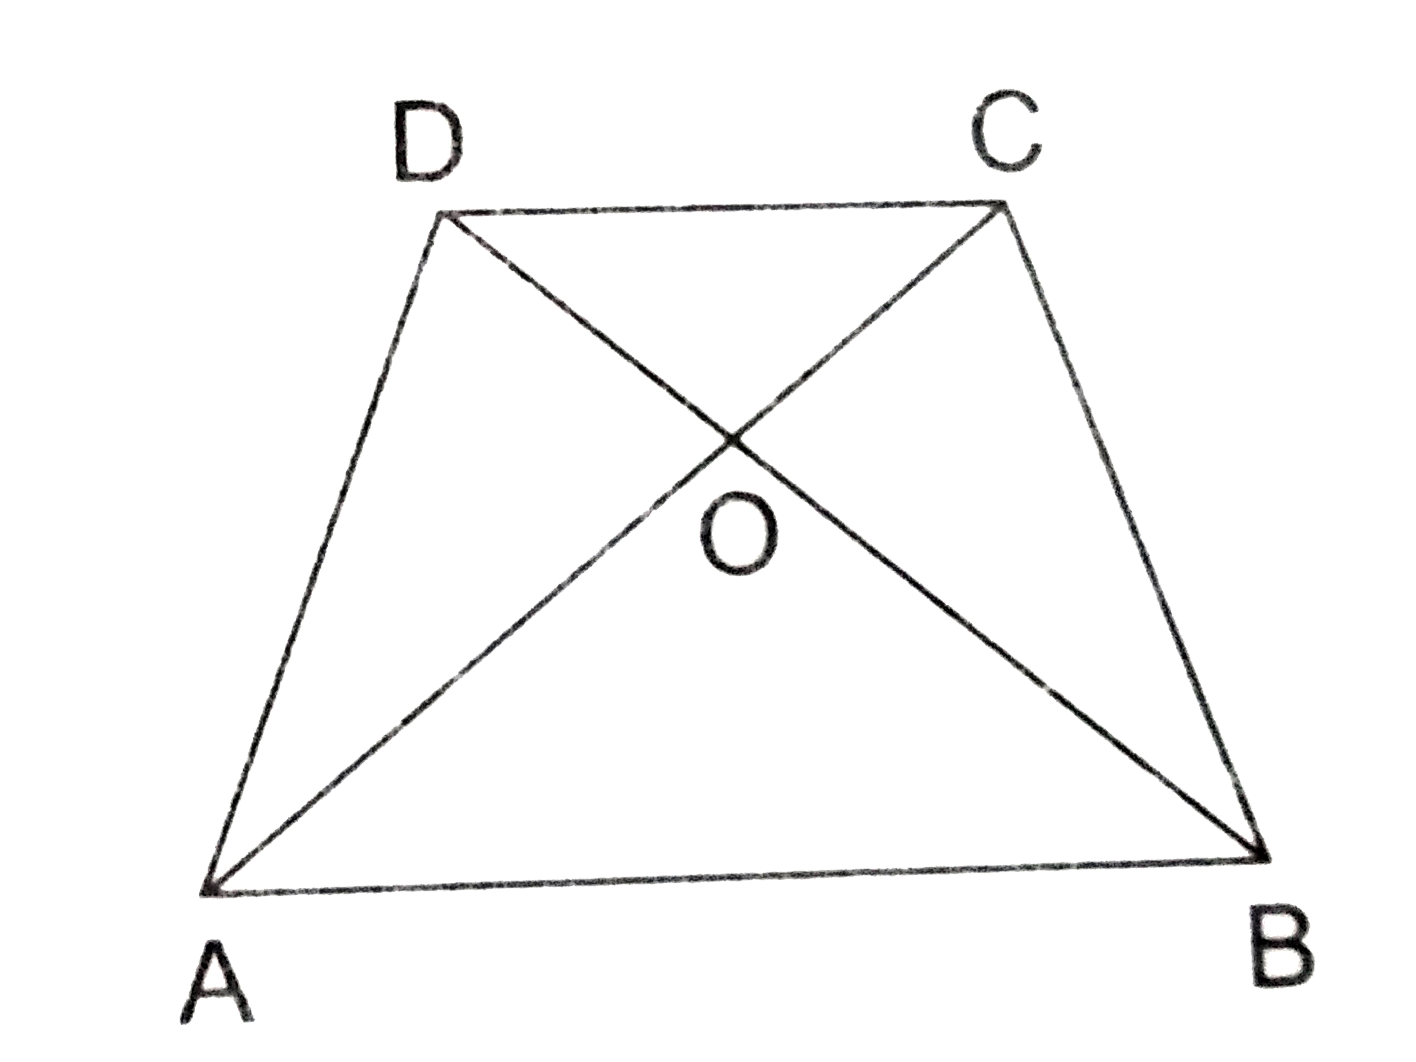 In the given figure, ABCD is trapezium whow diagonals AC and BD intersect at O such that OA=(3x-1) cm, (OB=(2x+1) cm, OC=(5x-3) cm and OD =(6x-5)cm. Then, x=?